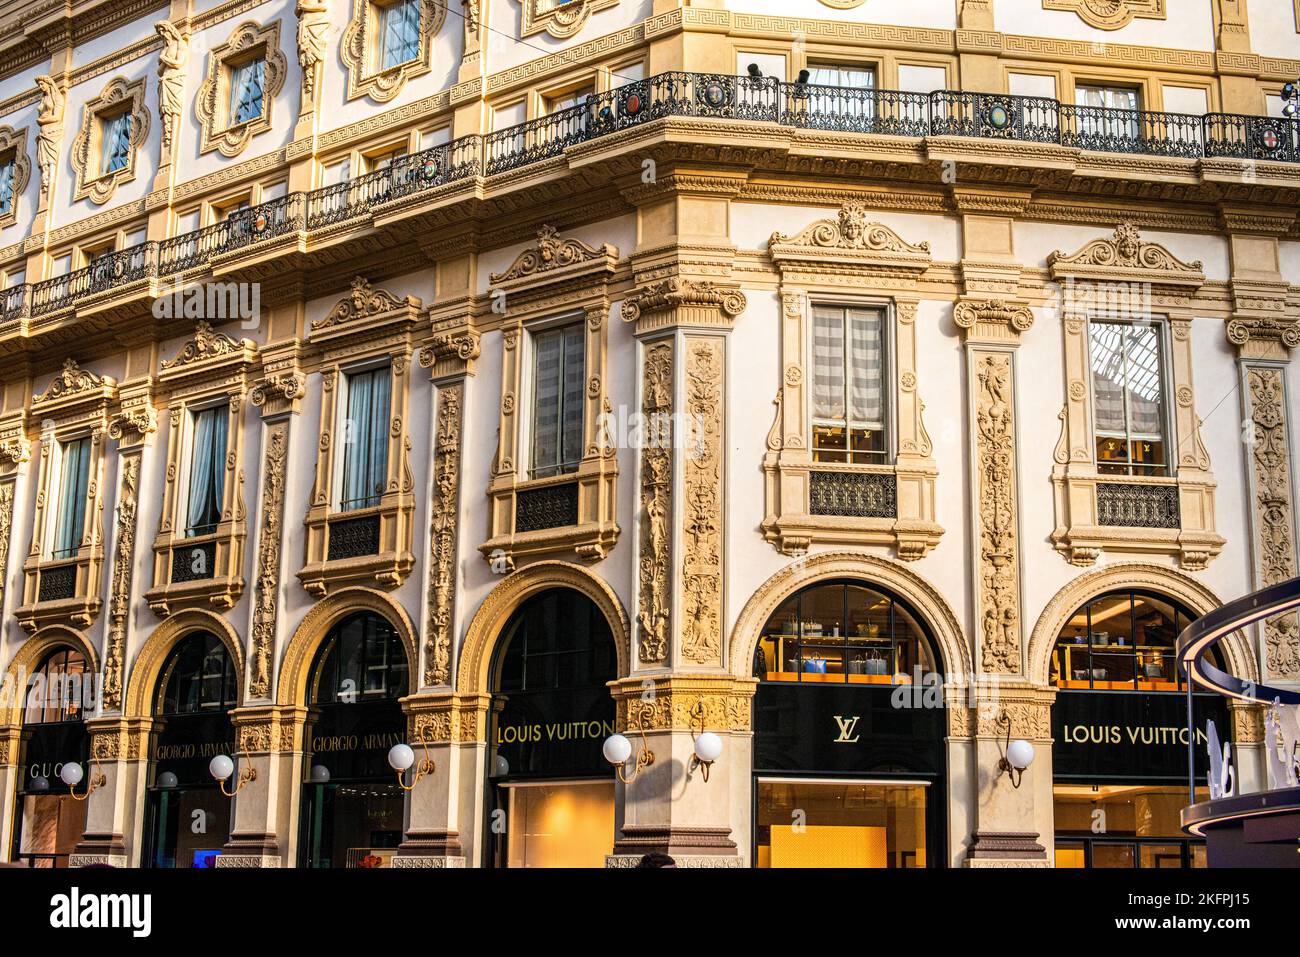 Milan, Italy, 20 December 2018: Facade Of Louis Vuitton Store Inside  Galleria Vittorio Emanuele II The World's Oldest Shopping Mall, Milan,  Italy Stock Photo, Picture and Royalty Free Image. Image 142309650.